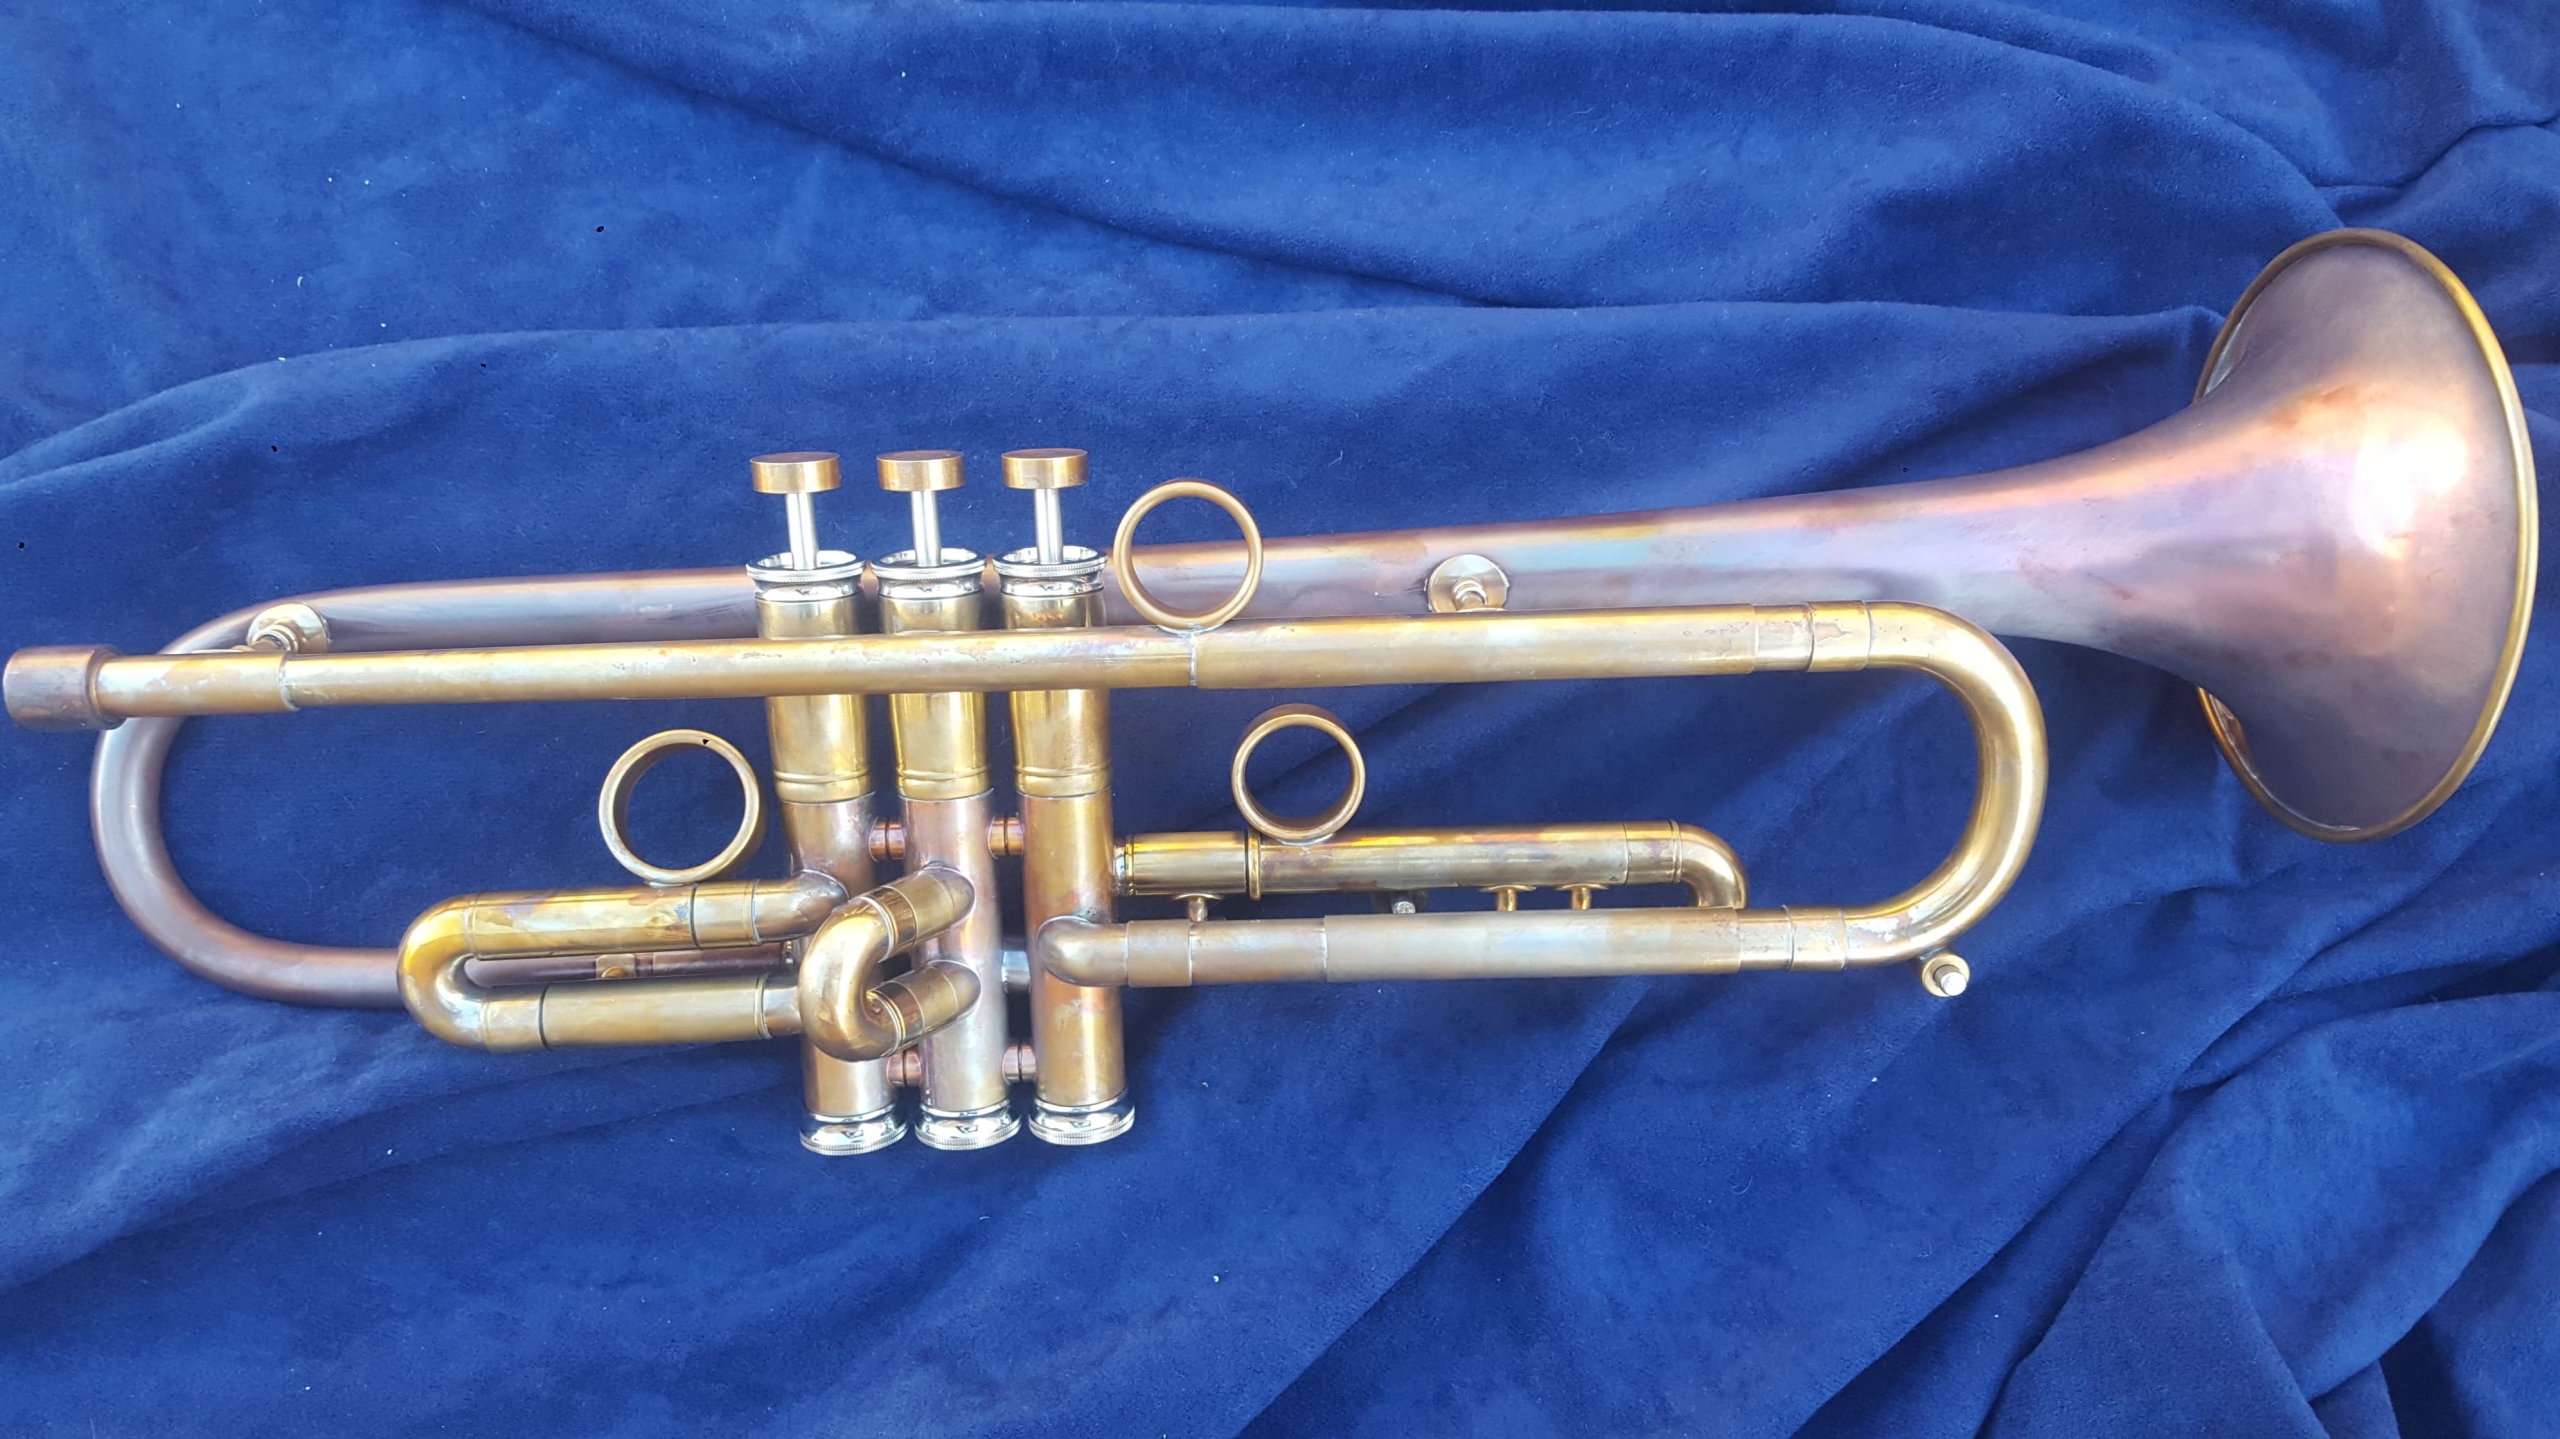 Del Quadro Custom Grizzly Trumpet with an Acid Finish